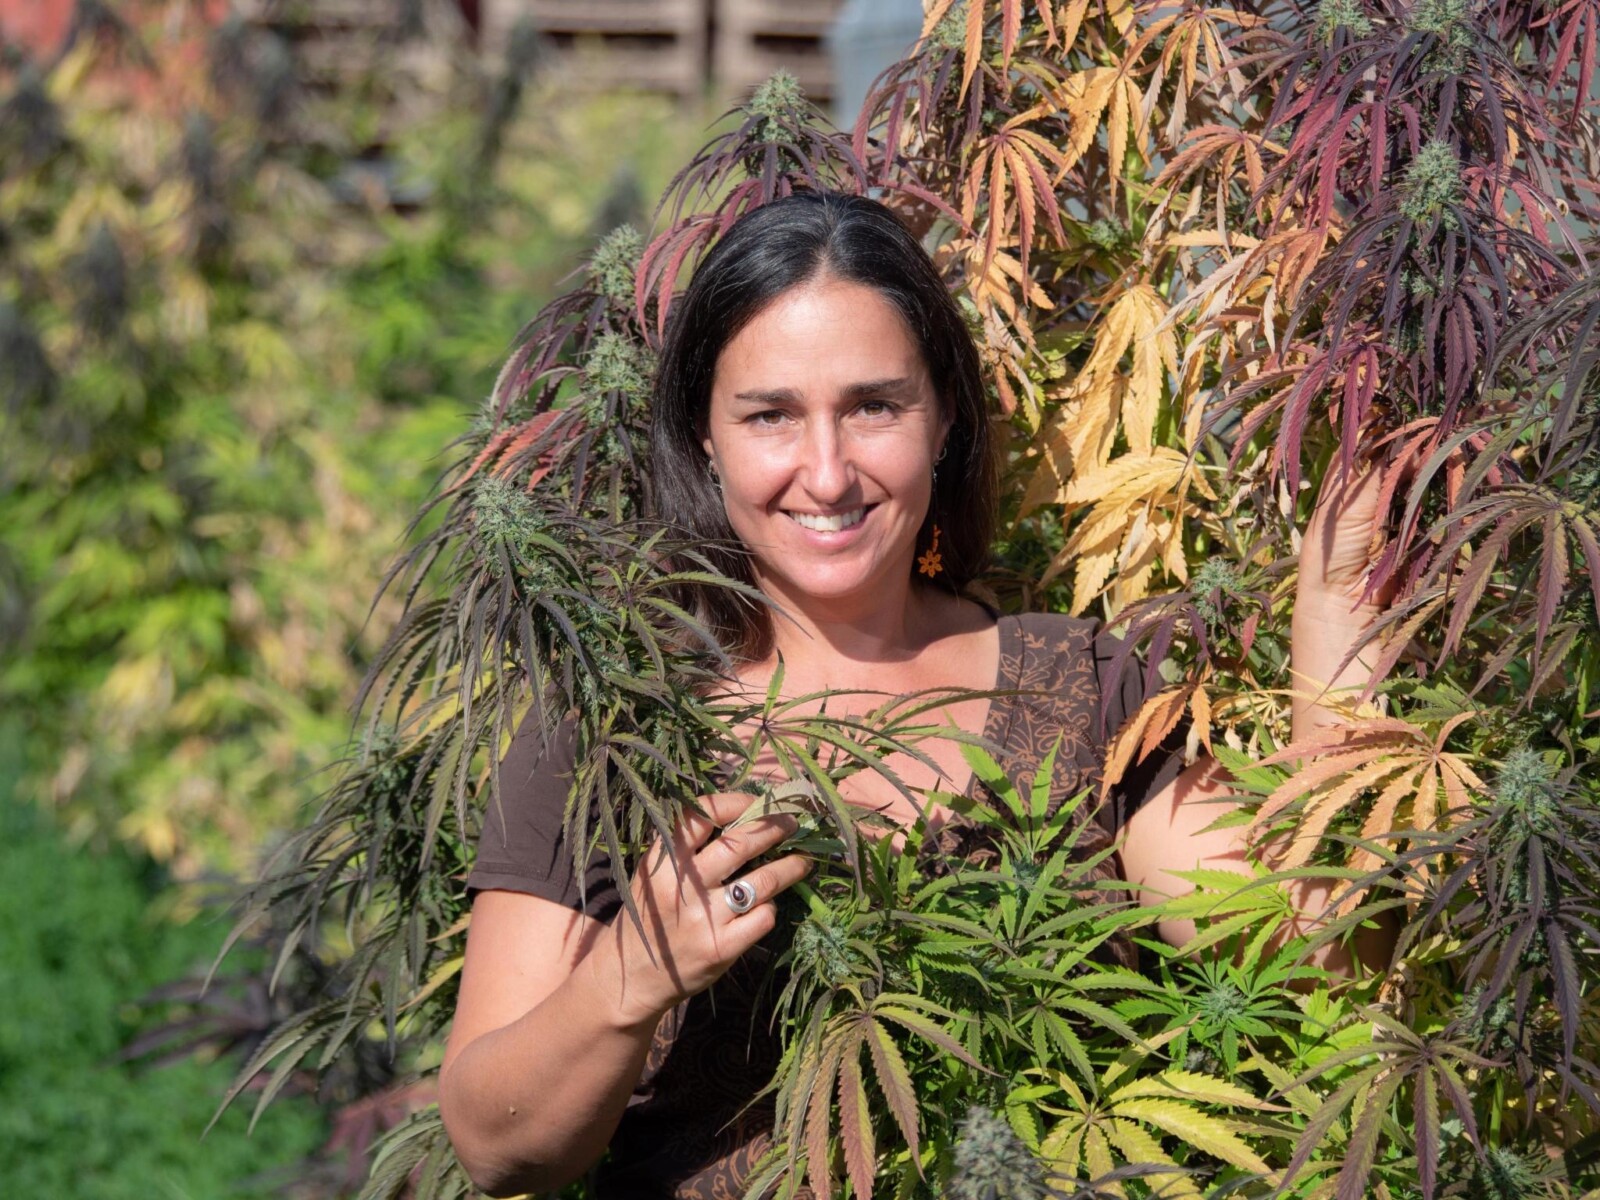 Robin Andruss, Master Grower of High Mountain Organics, is framed by lush cannabis plants in varying shades of green and purple, showcasing the vibrant and healthy growth of her organic cultivation. 